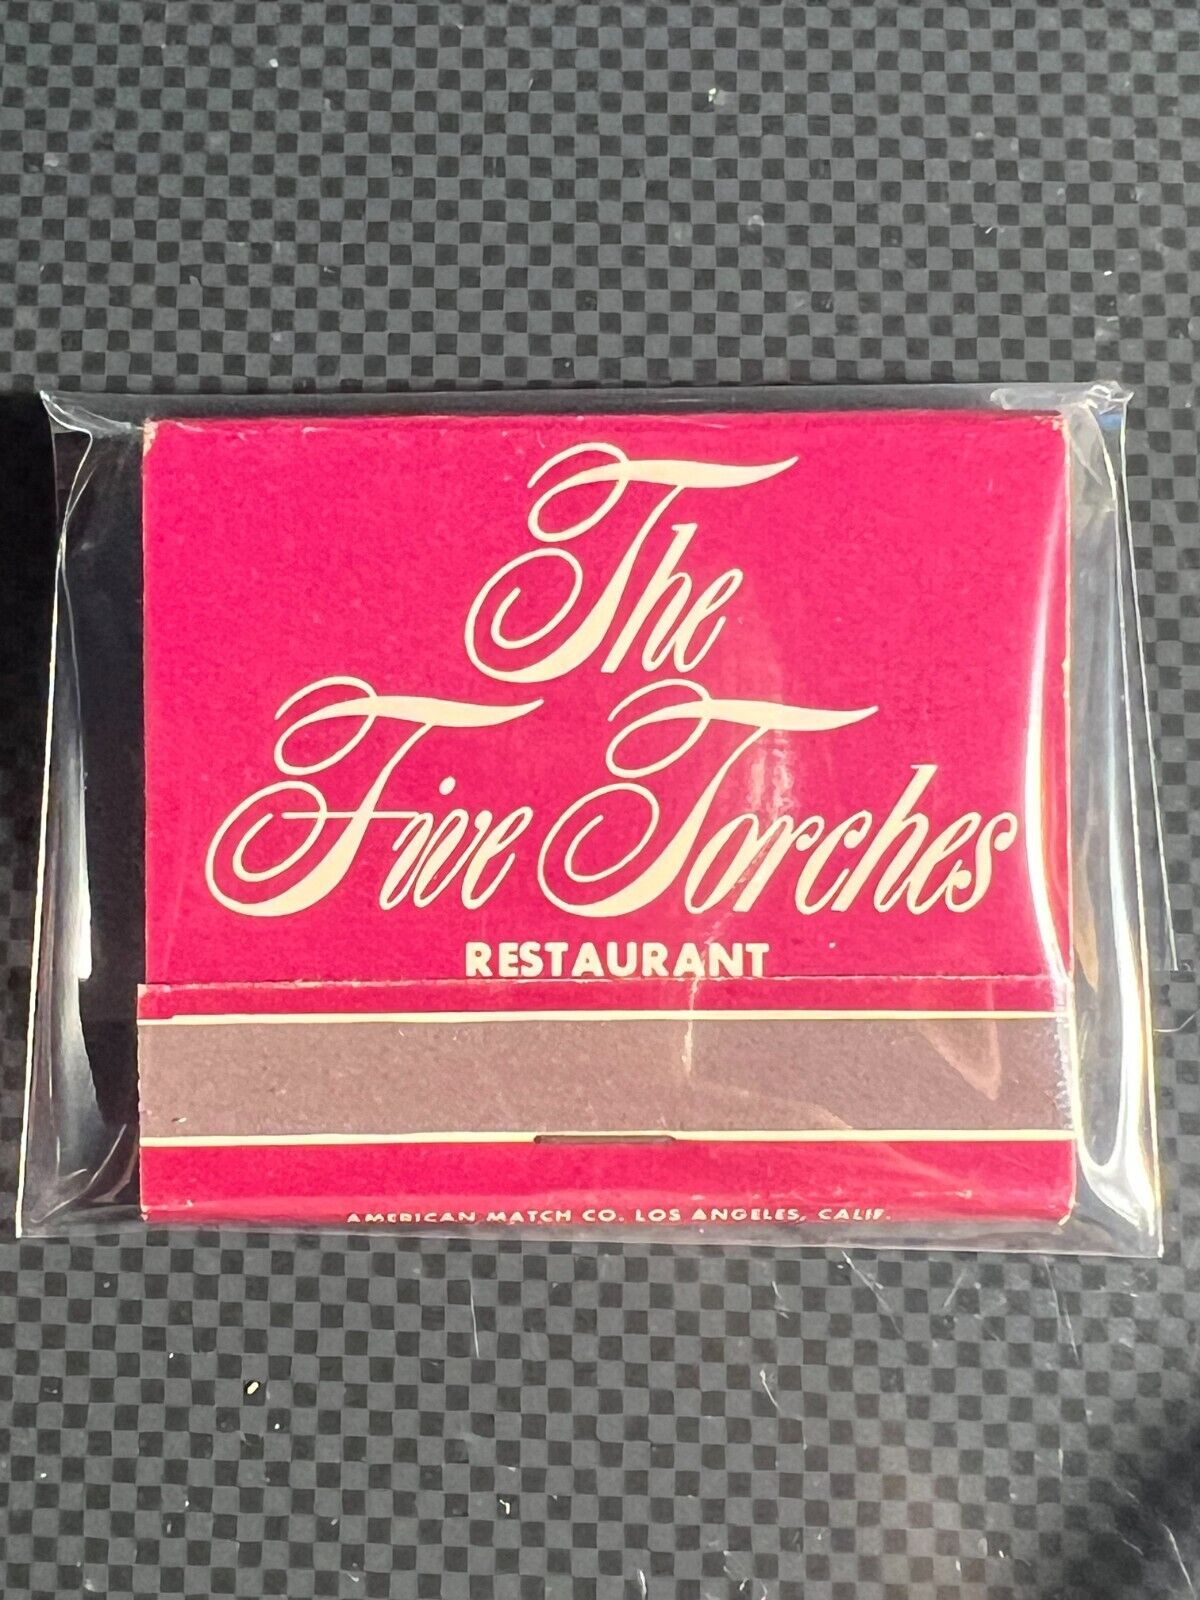 VINTAGE MATCHBOOK - THE FIVE TORCHES RESTAURANT - PLYMOUTH - UNSTRUCK